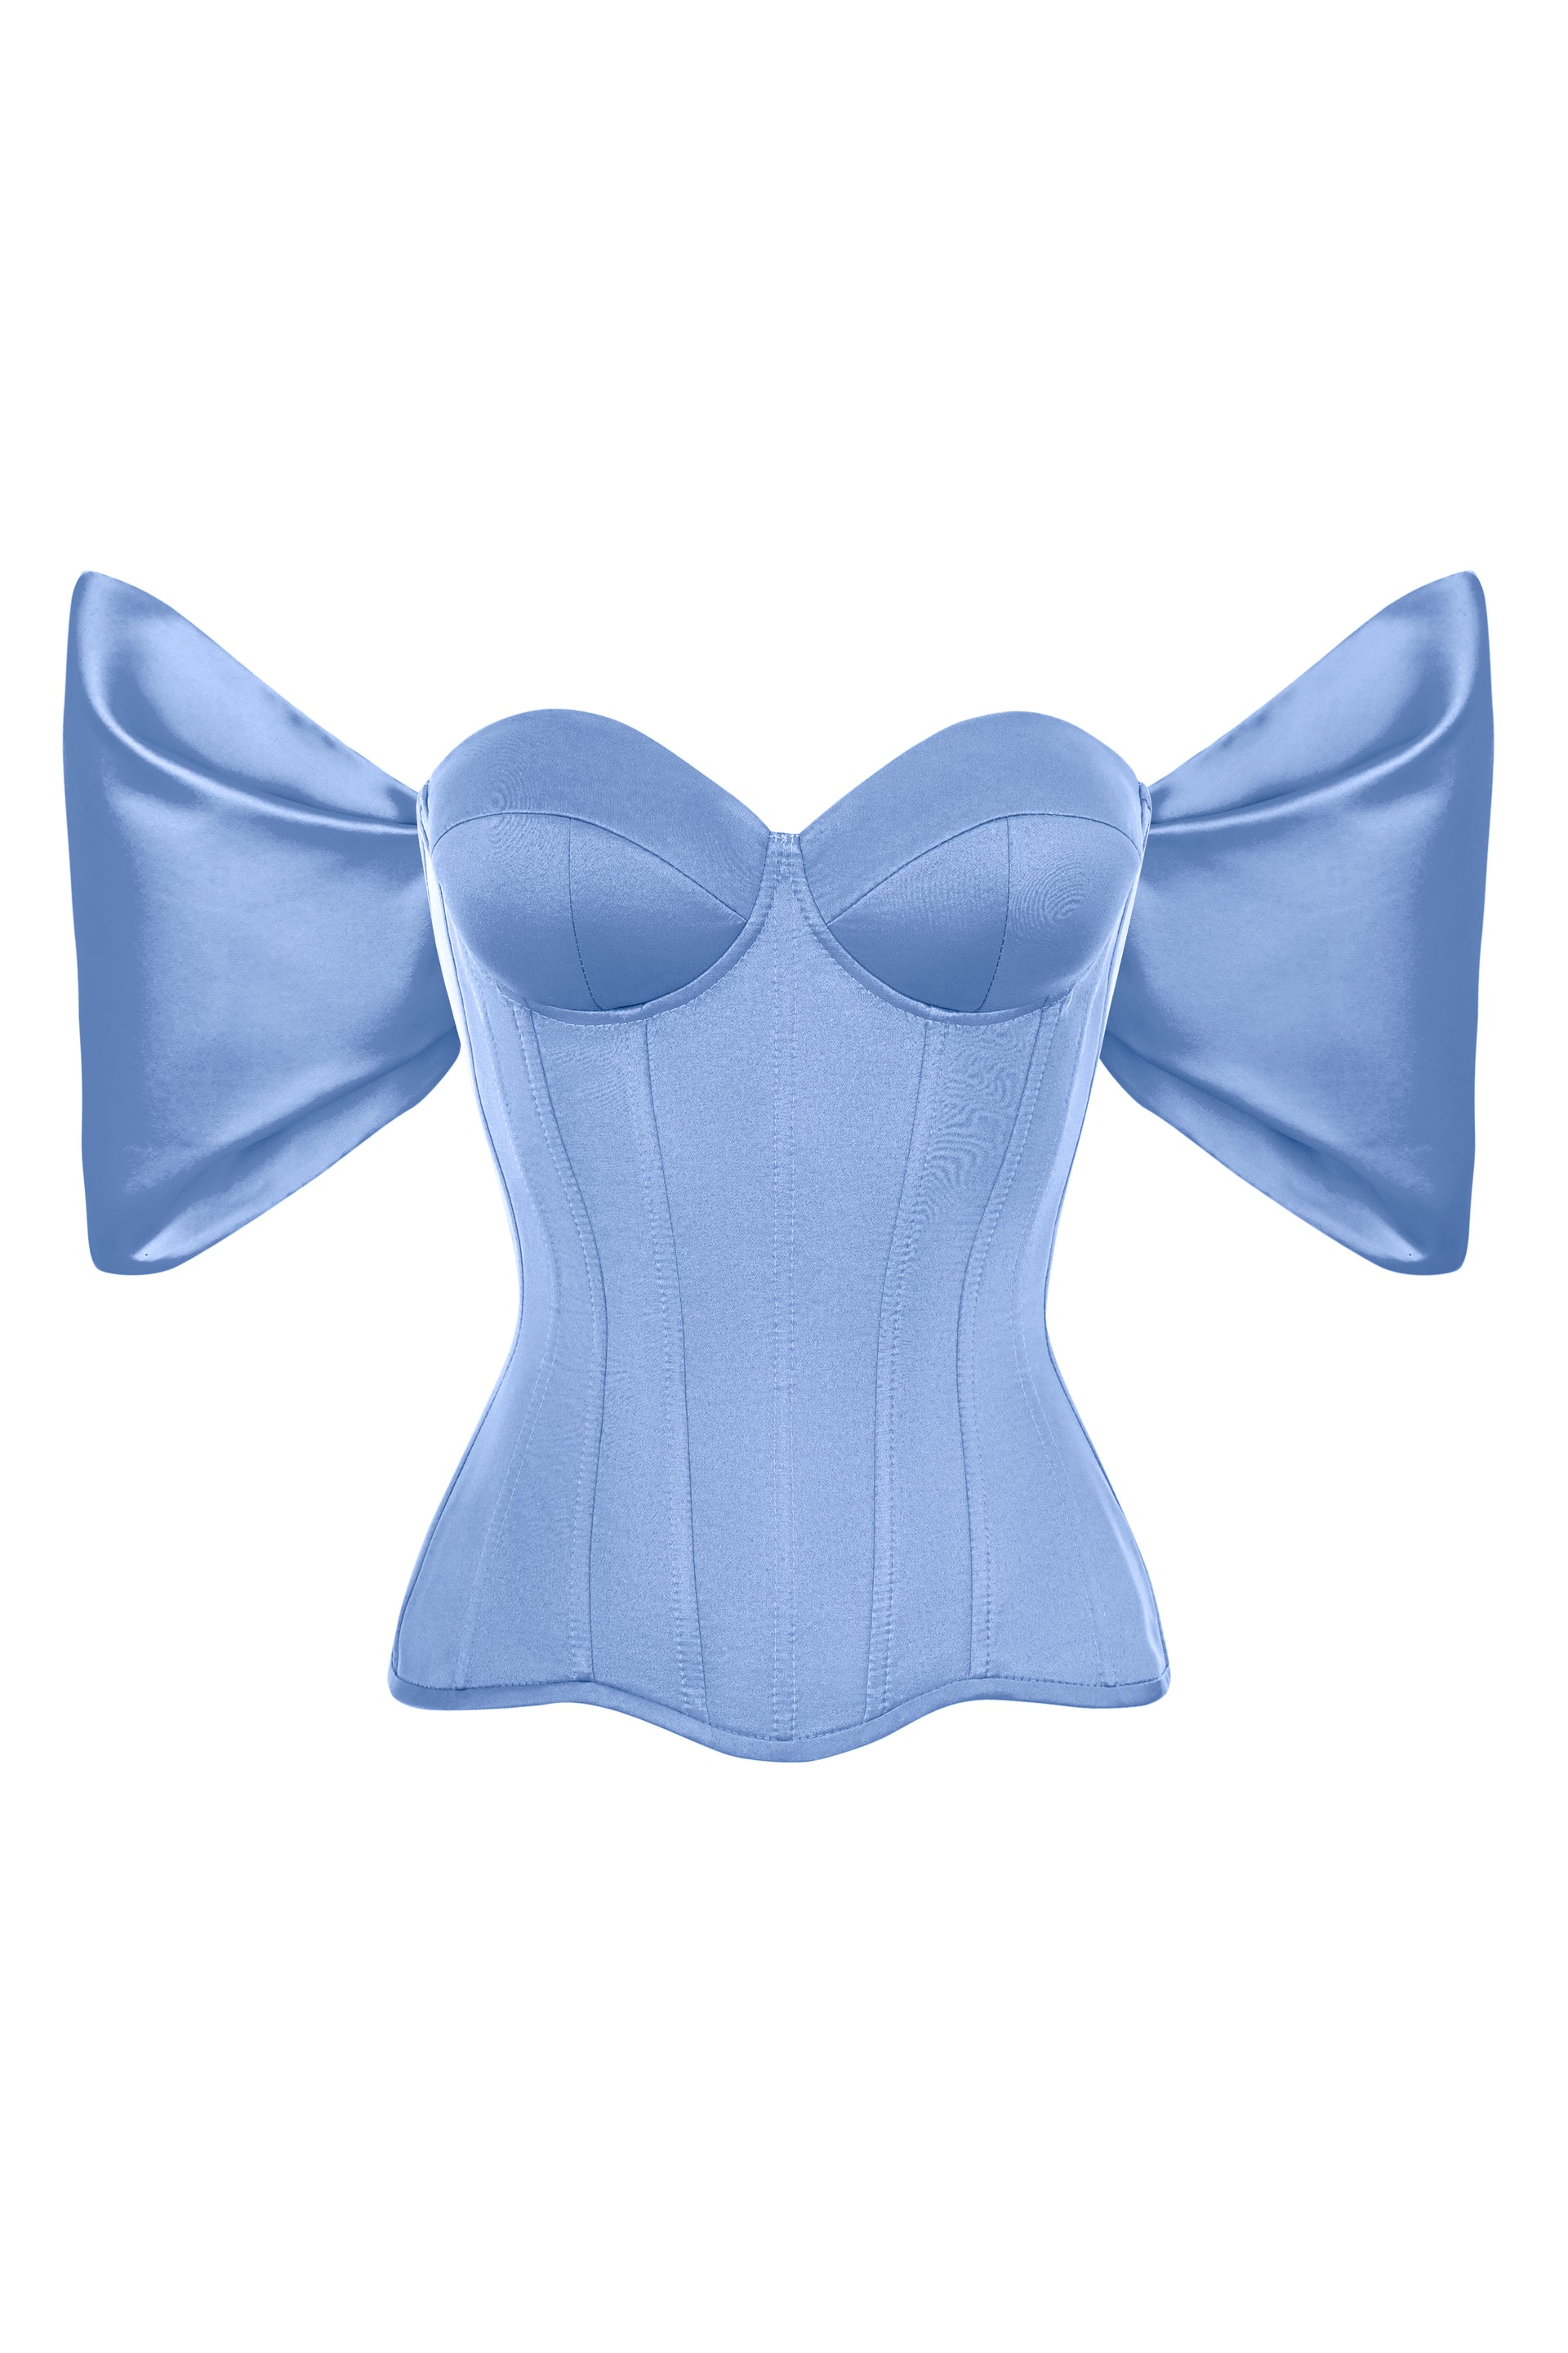 Jeans blue satin corset with detachable sleeves